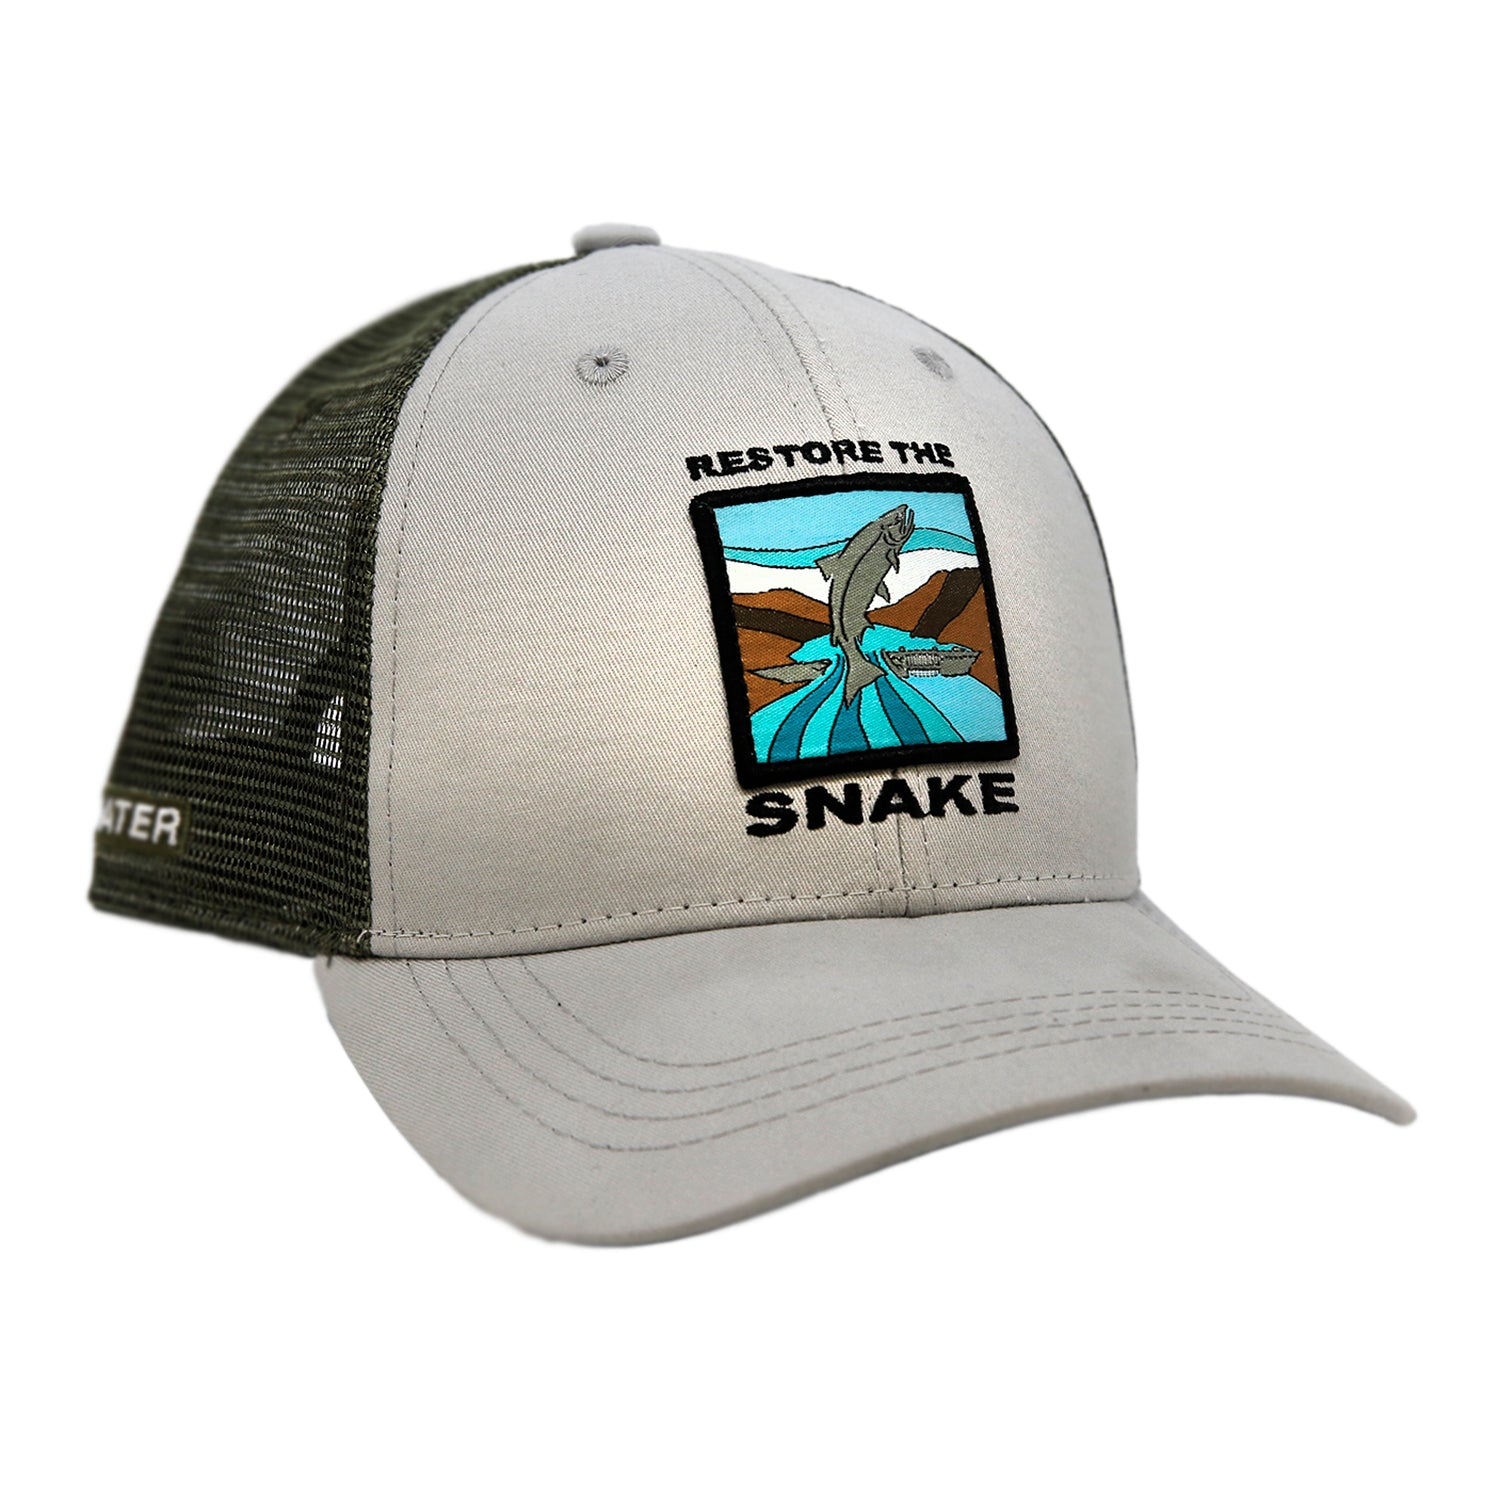 a hat with green mesh back and light grey front. the front reads restore the snake in embroidery and a trout jumping over a dam